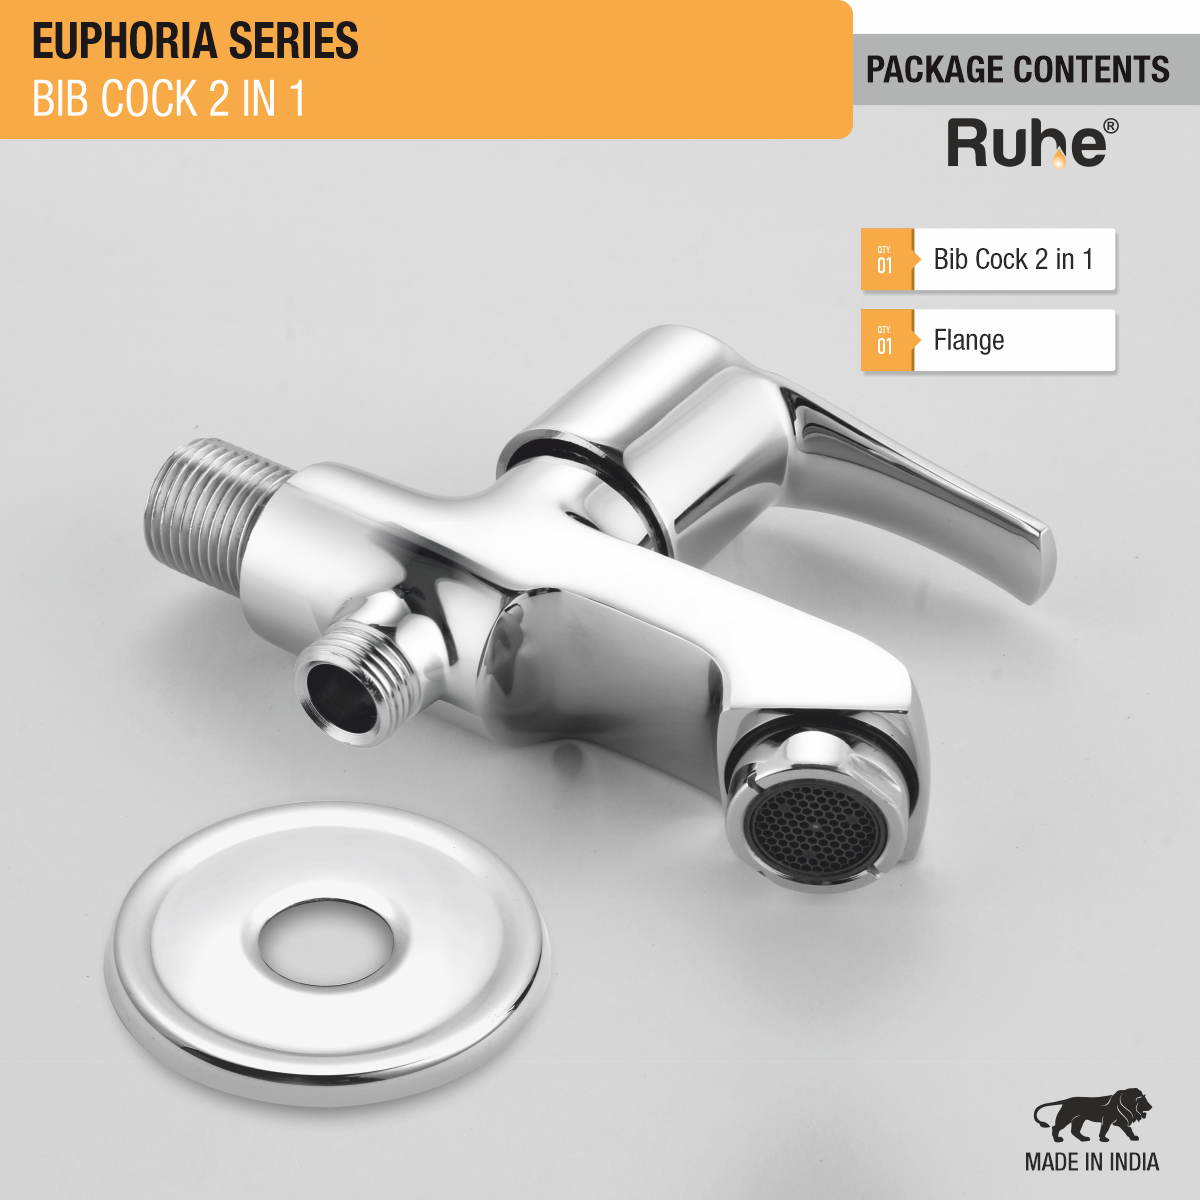 Euphoria Two Way Bib Tap Faucet package content